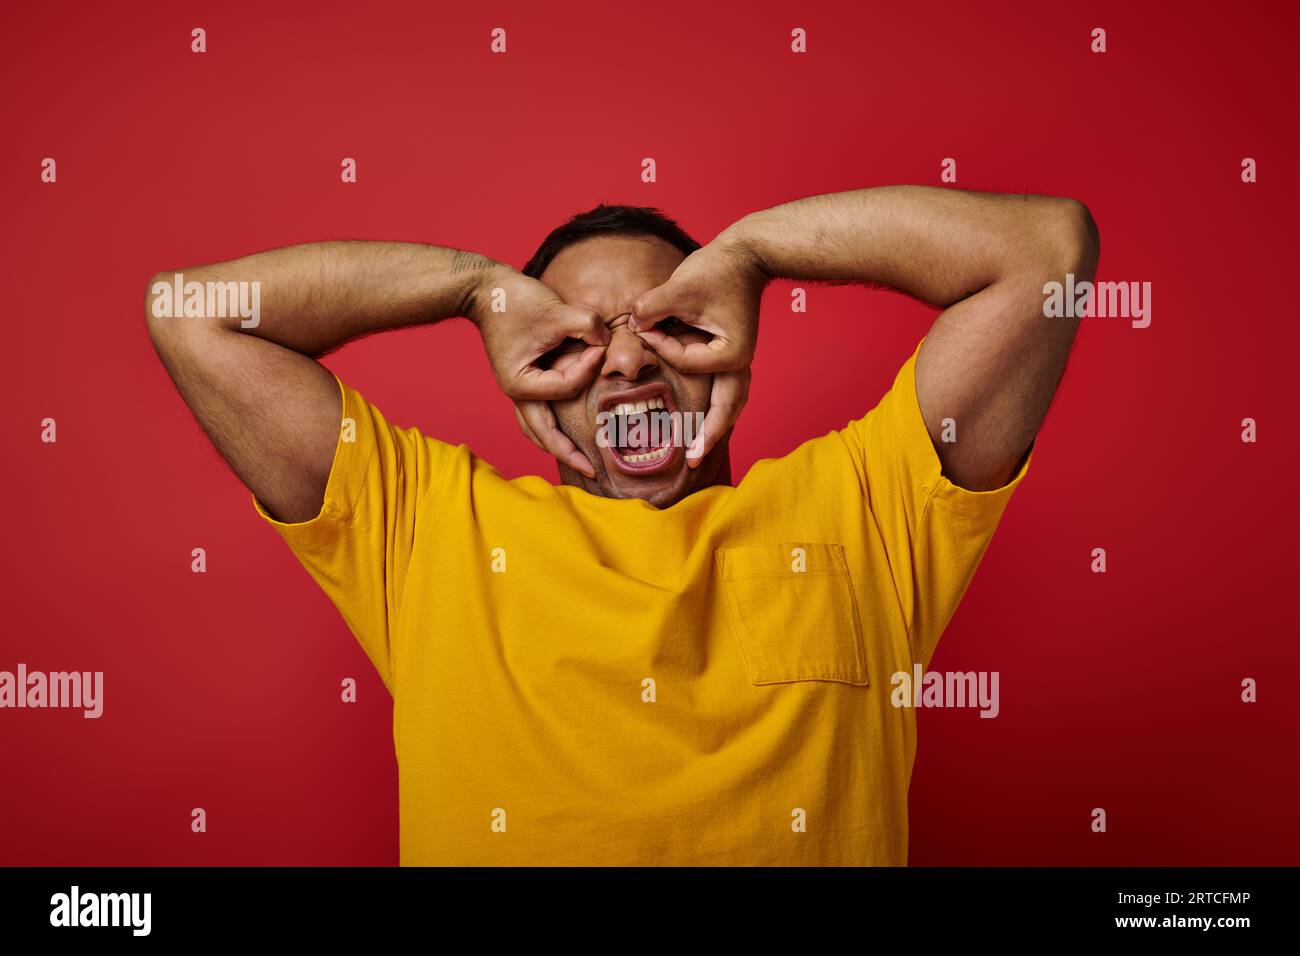 emotional indian man in yellow t-shirt screaming and gesturing on red backdrop, expressive face Stock Photo